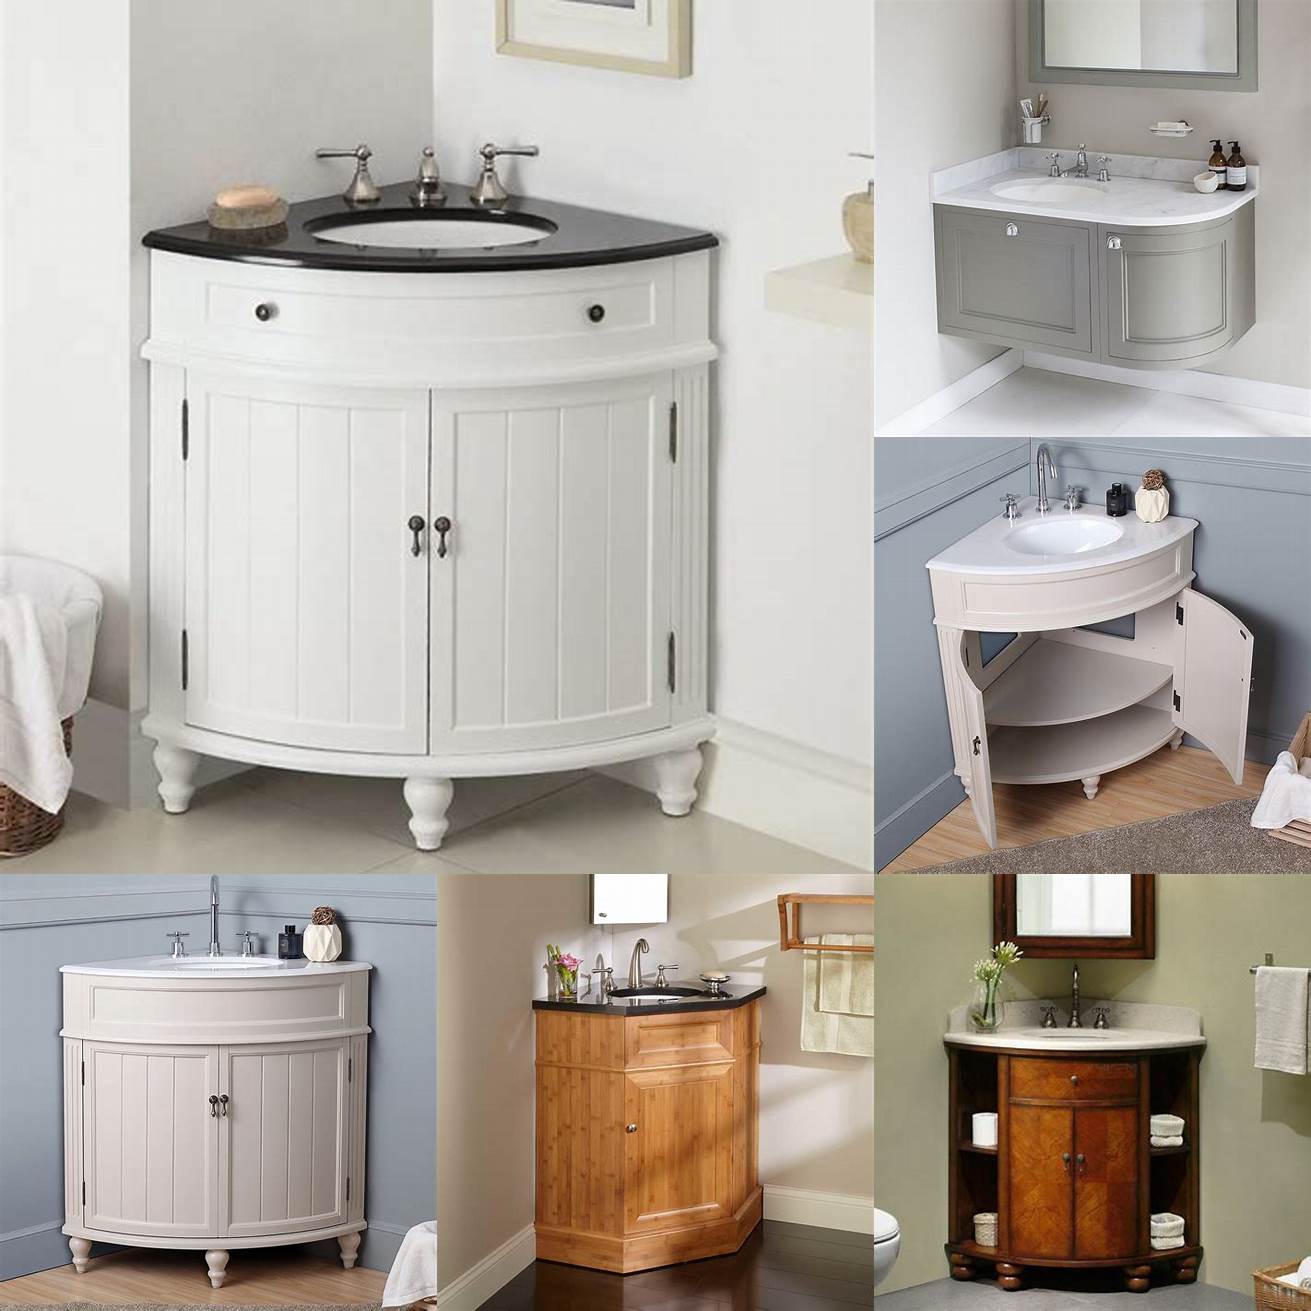 A freestanding corner sink vanity is perfect for larger bathrooms